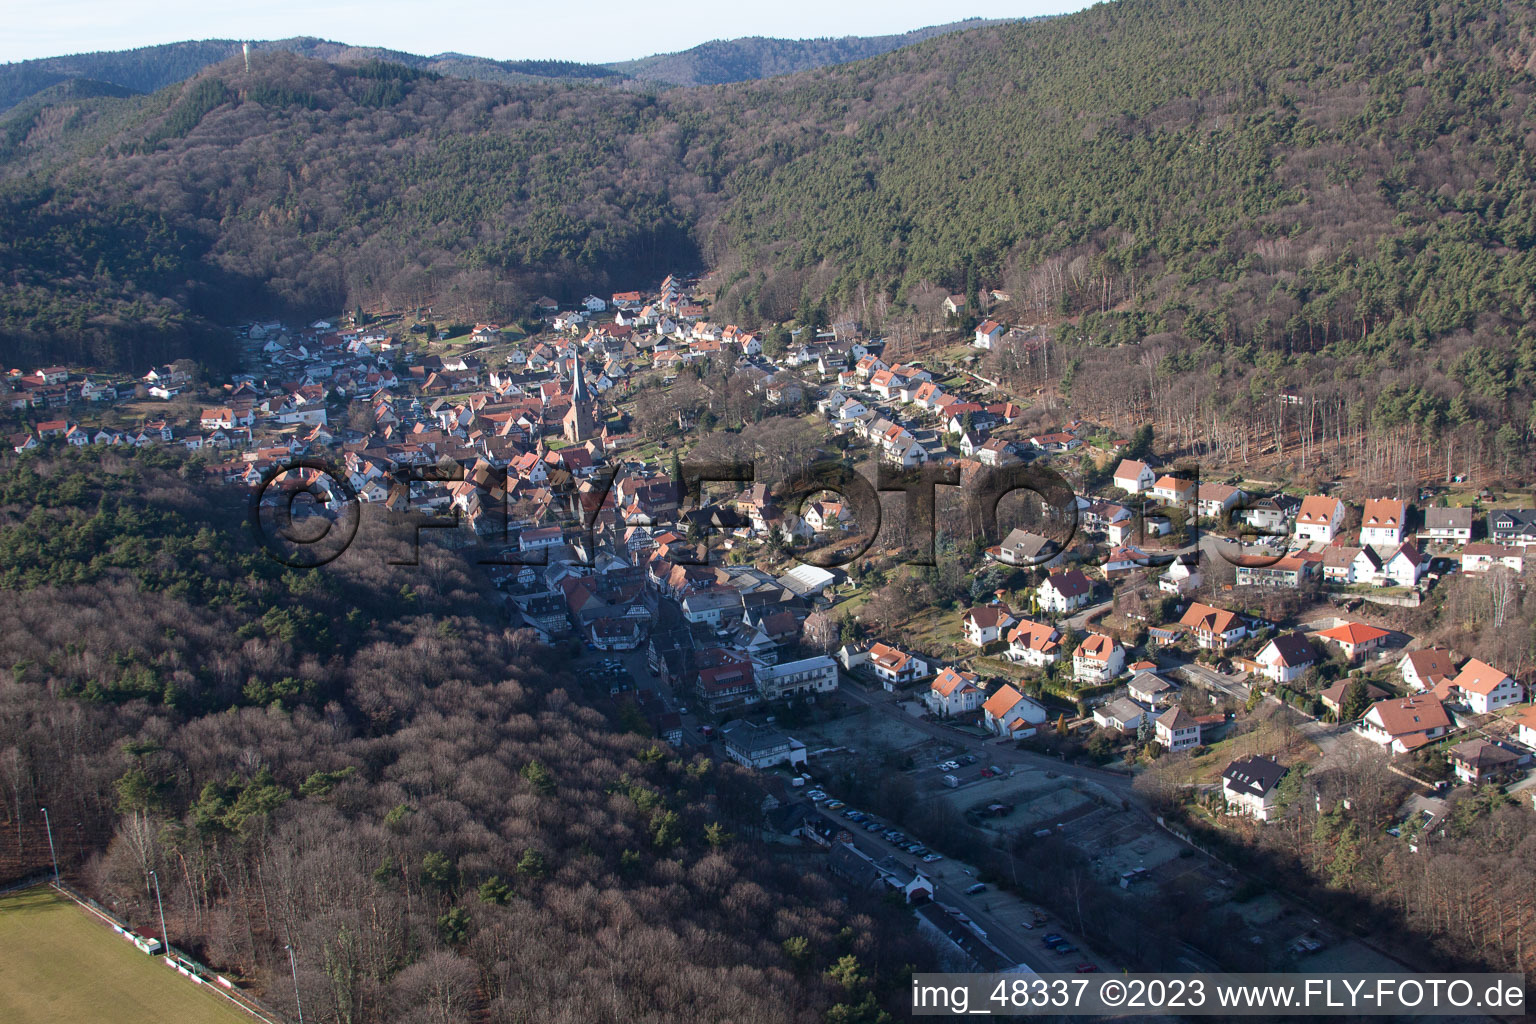 Drone recording of Dörrenbach in the state Rhineland-Palatinate, Germany